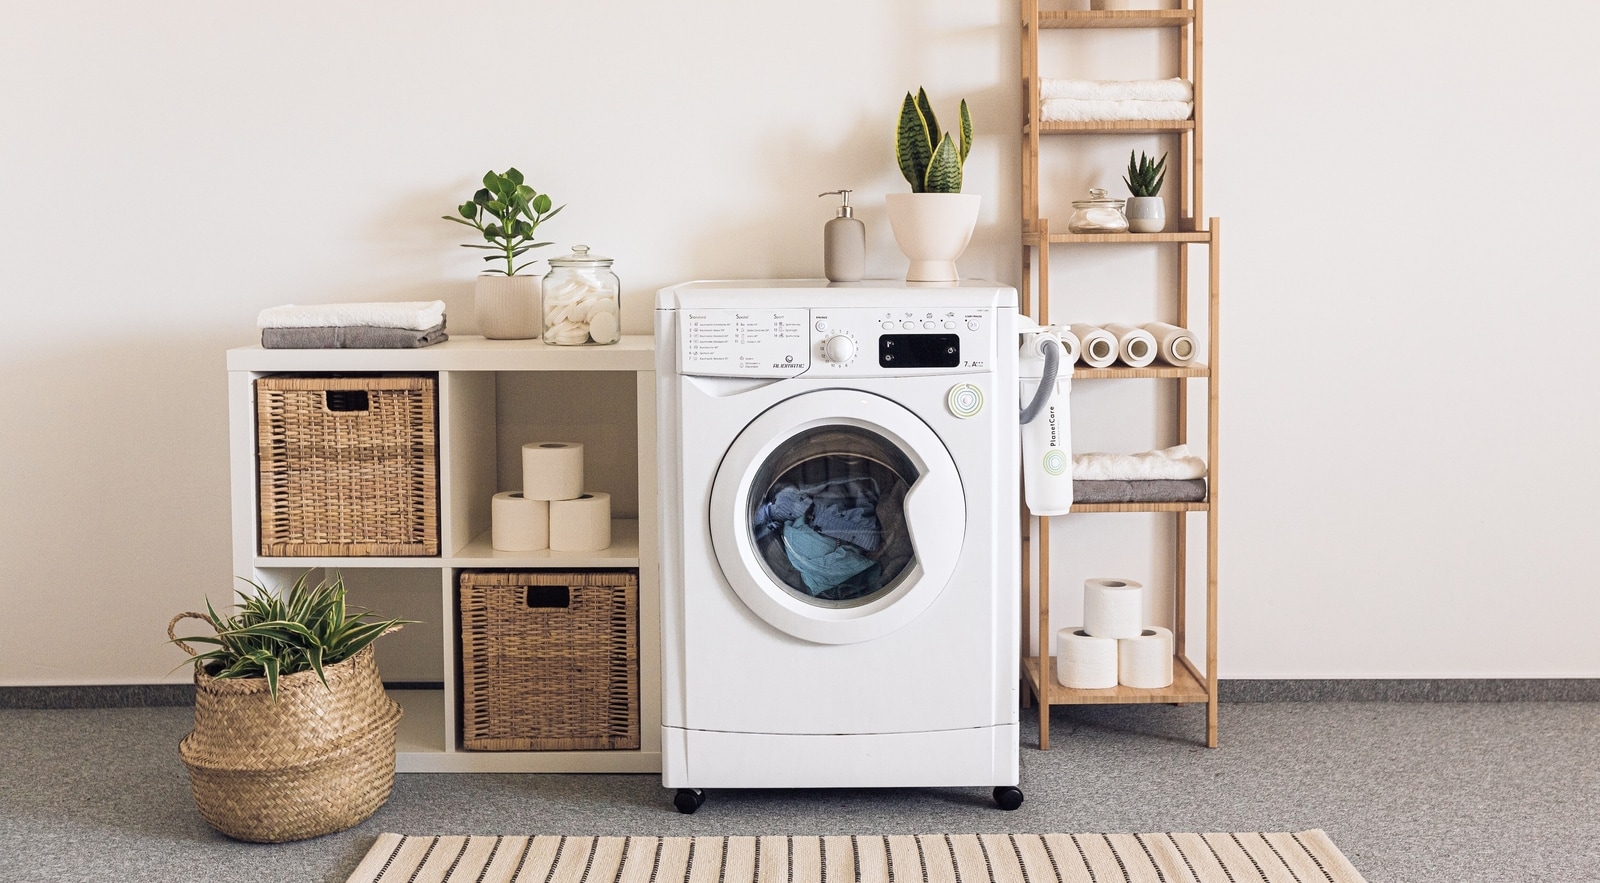 Eyeing laundry bliss? Samsung to Whirlpool, here is a comprehensive guide to the best washing machines on Amazon